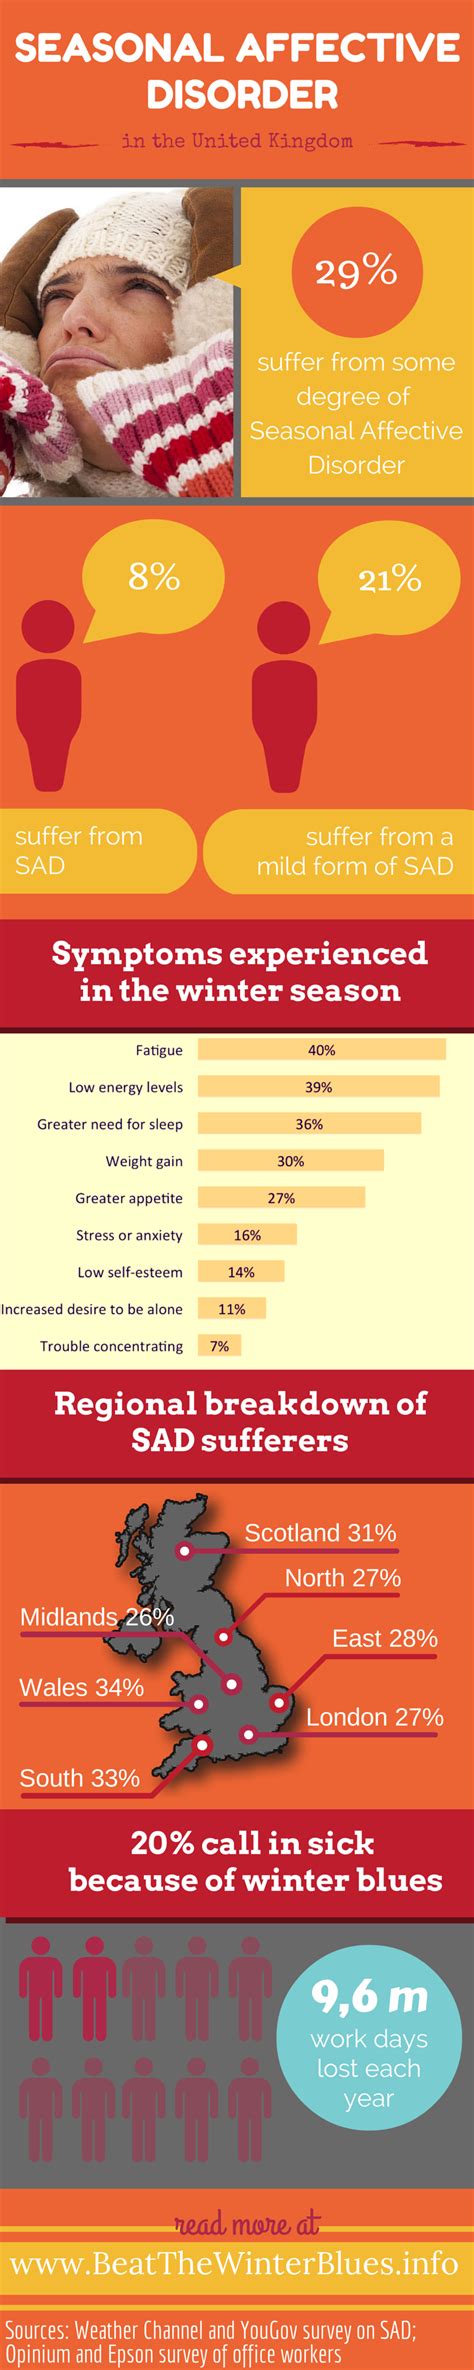 Infographic Seasonal Affective Disorder In The United Kingdom Beat